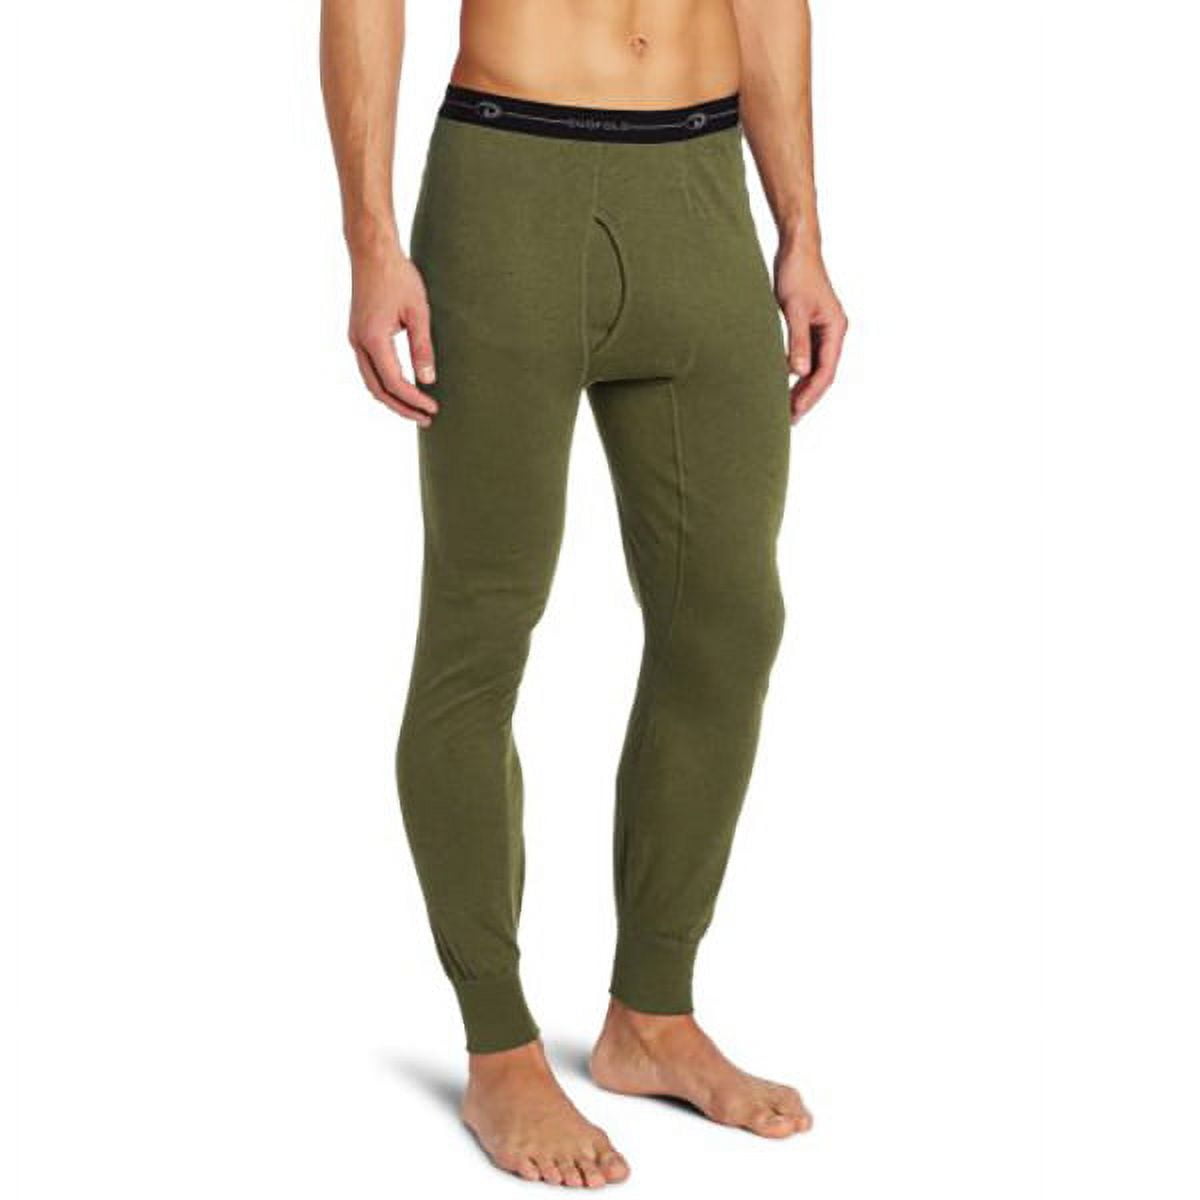 Duofold by Champion Men's Originals Mid-weight Wool Blend Thermal  Pants,Olive Heather,Large